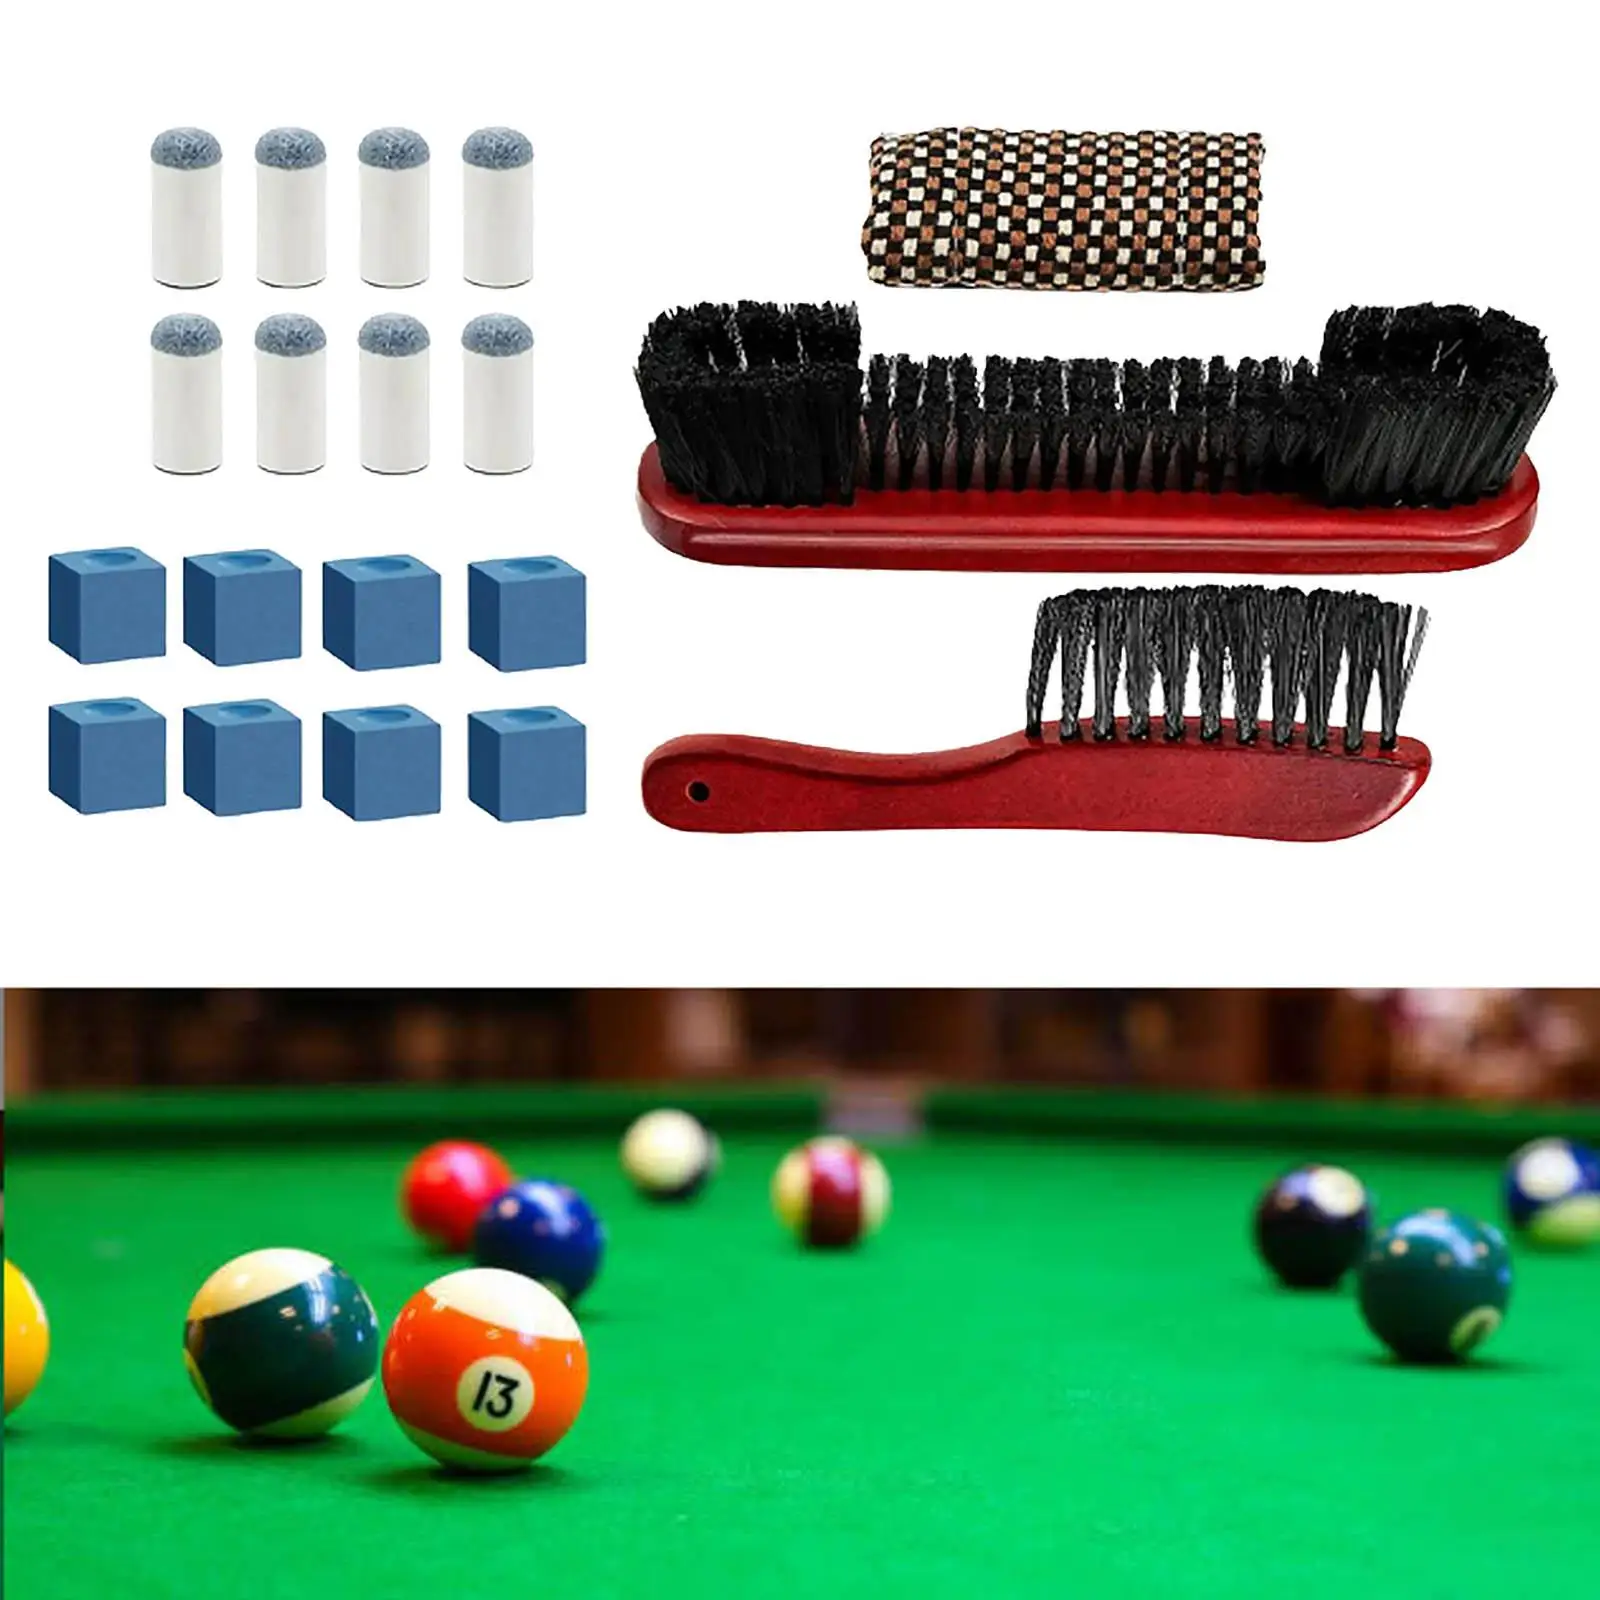 Billiards Pool Table Brush Set Cleaning Tool Cue Tips Replacements